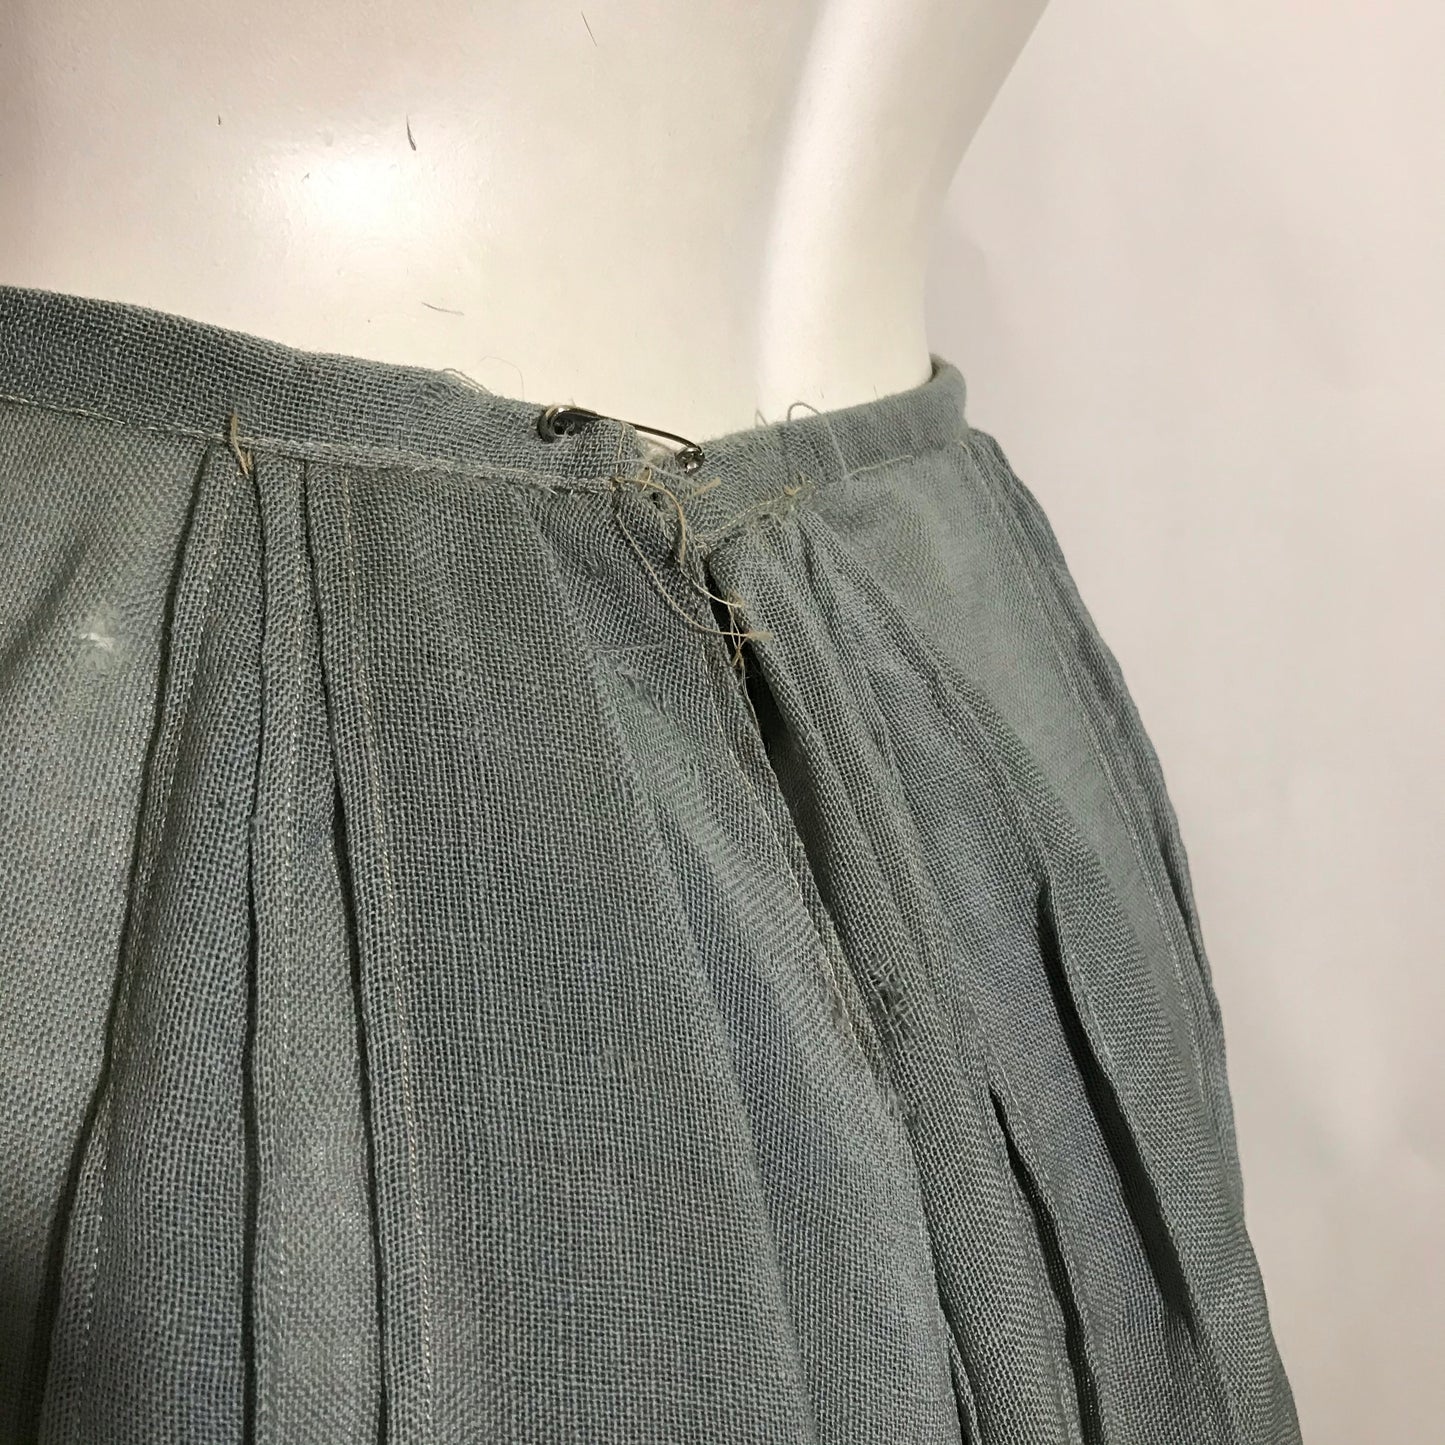 Grey Blue Woven Wool Full Skirt with Lace Appliques circa 1890s